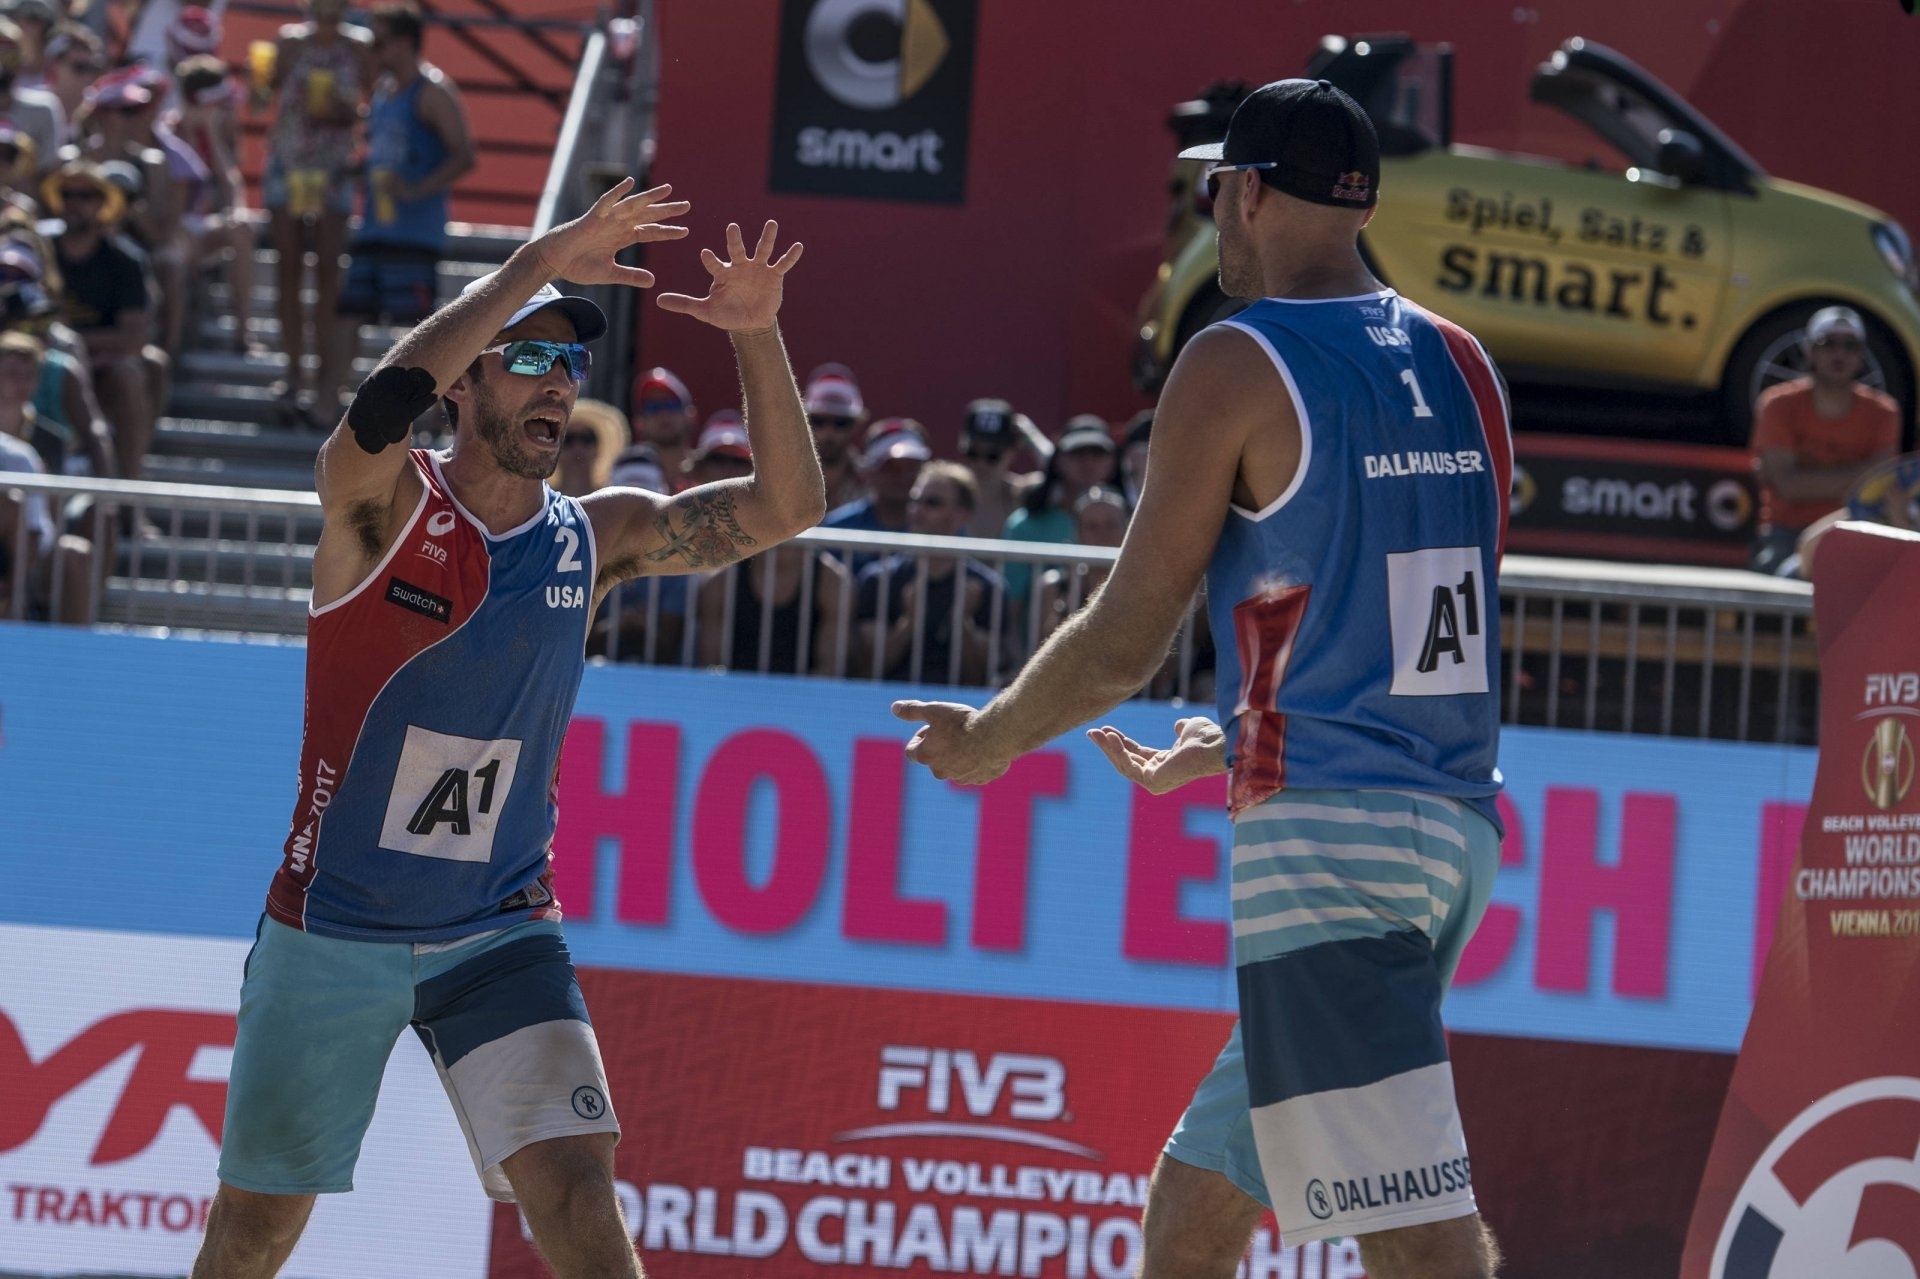 Lucena/Dalhausser in action during the World Championships in Vienna